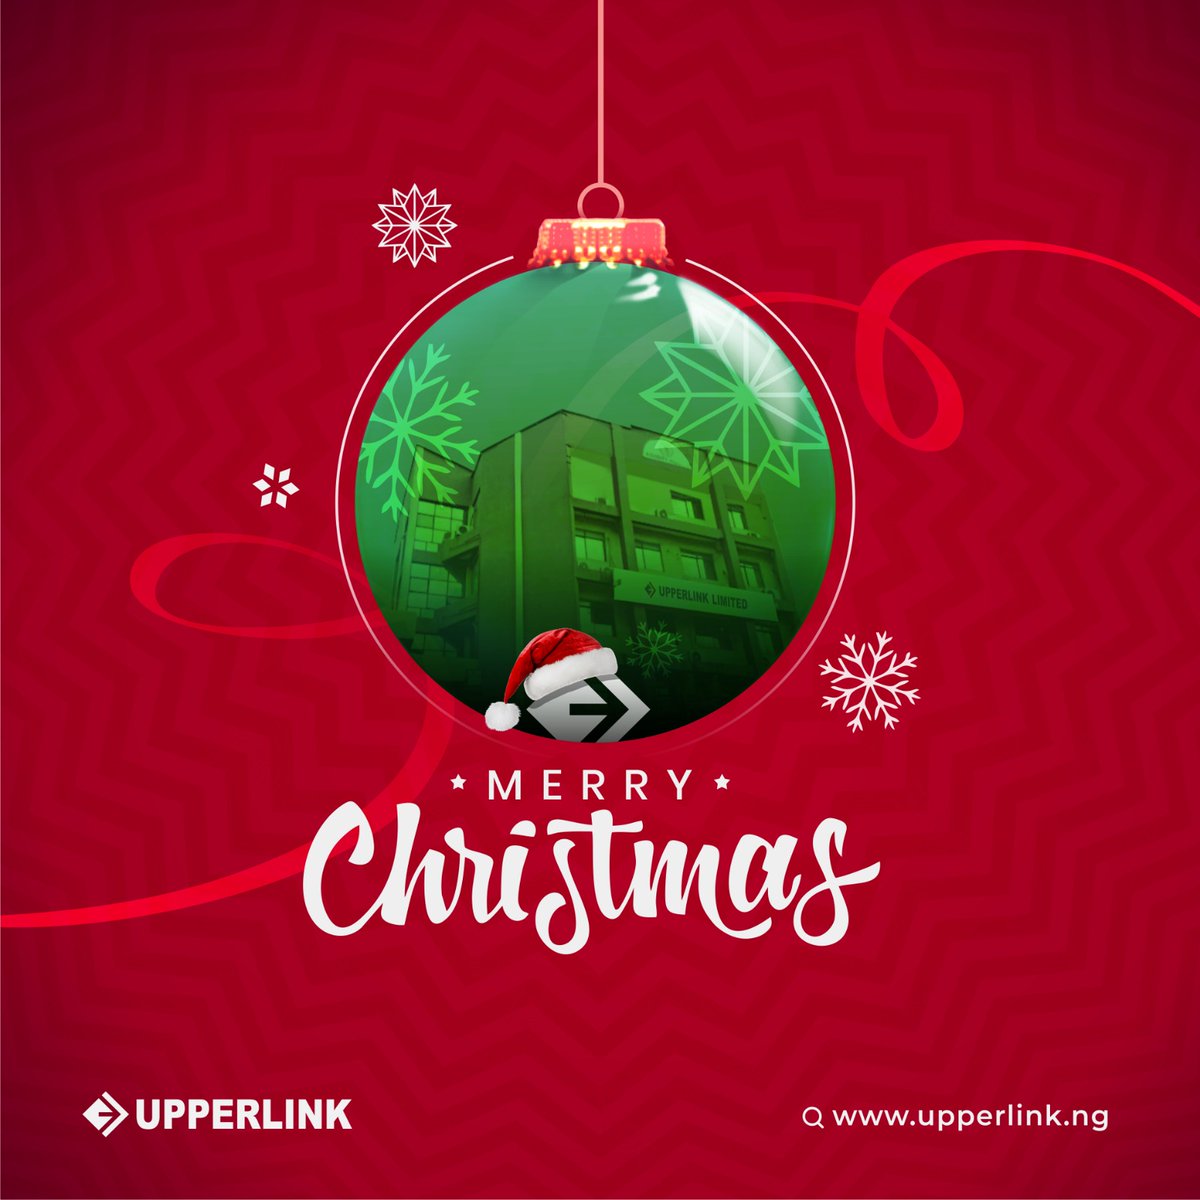 Spreading joy and coding cheer this Christmas at Upperlink Limited! 🎄✨ 

#upperlinklimited #domainregistration #webhostingservices #christmas2023 #FestiveSeason #explore #explorepage